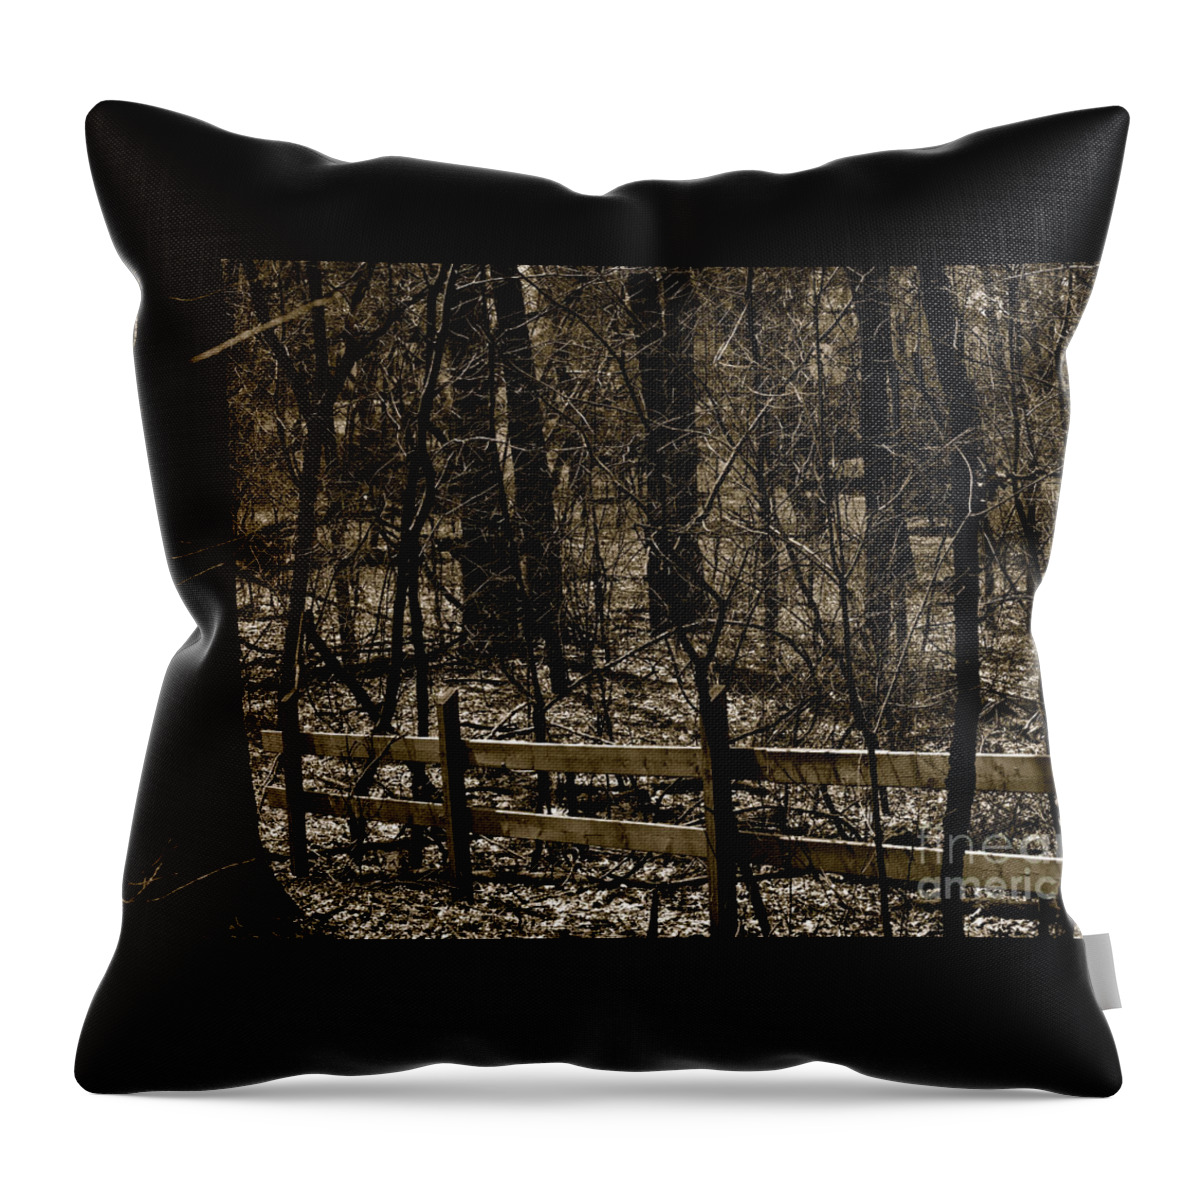 Blackandwhite Throw Pillow featuring the photograph Fence In The Woods by Frank J Casella